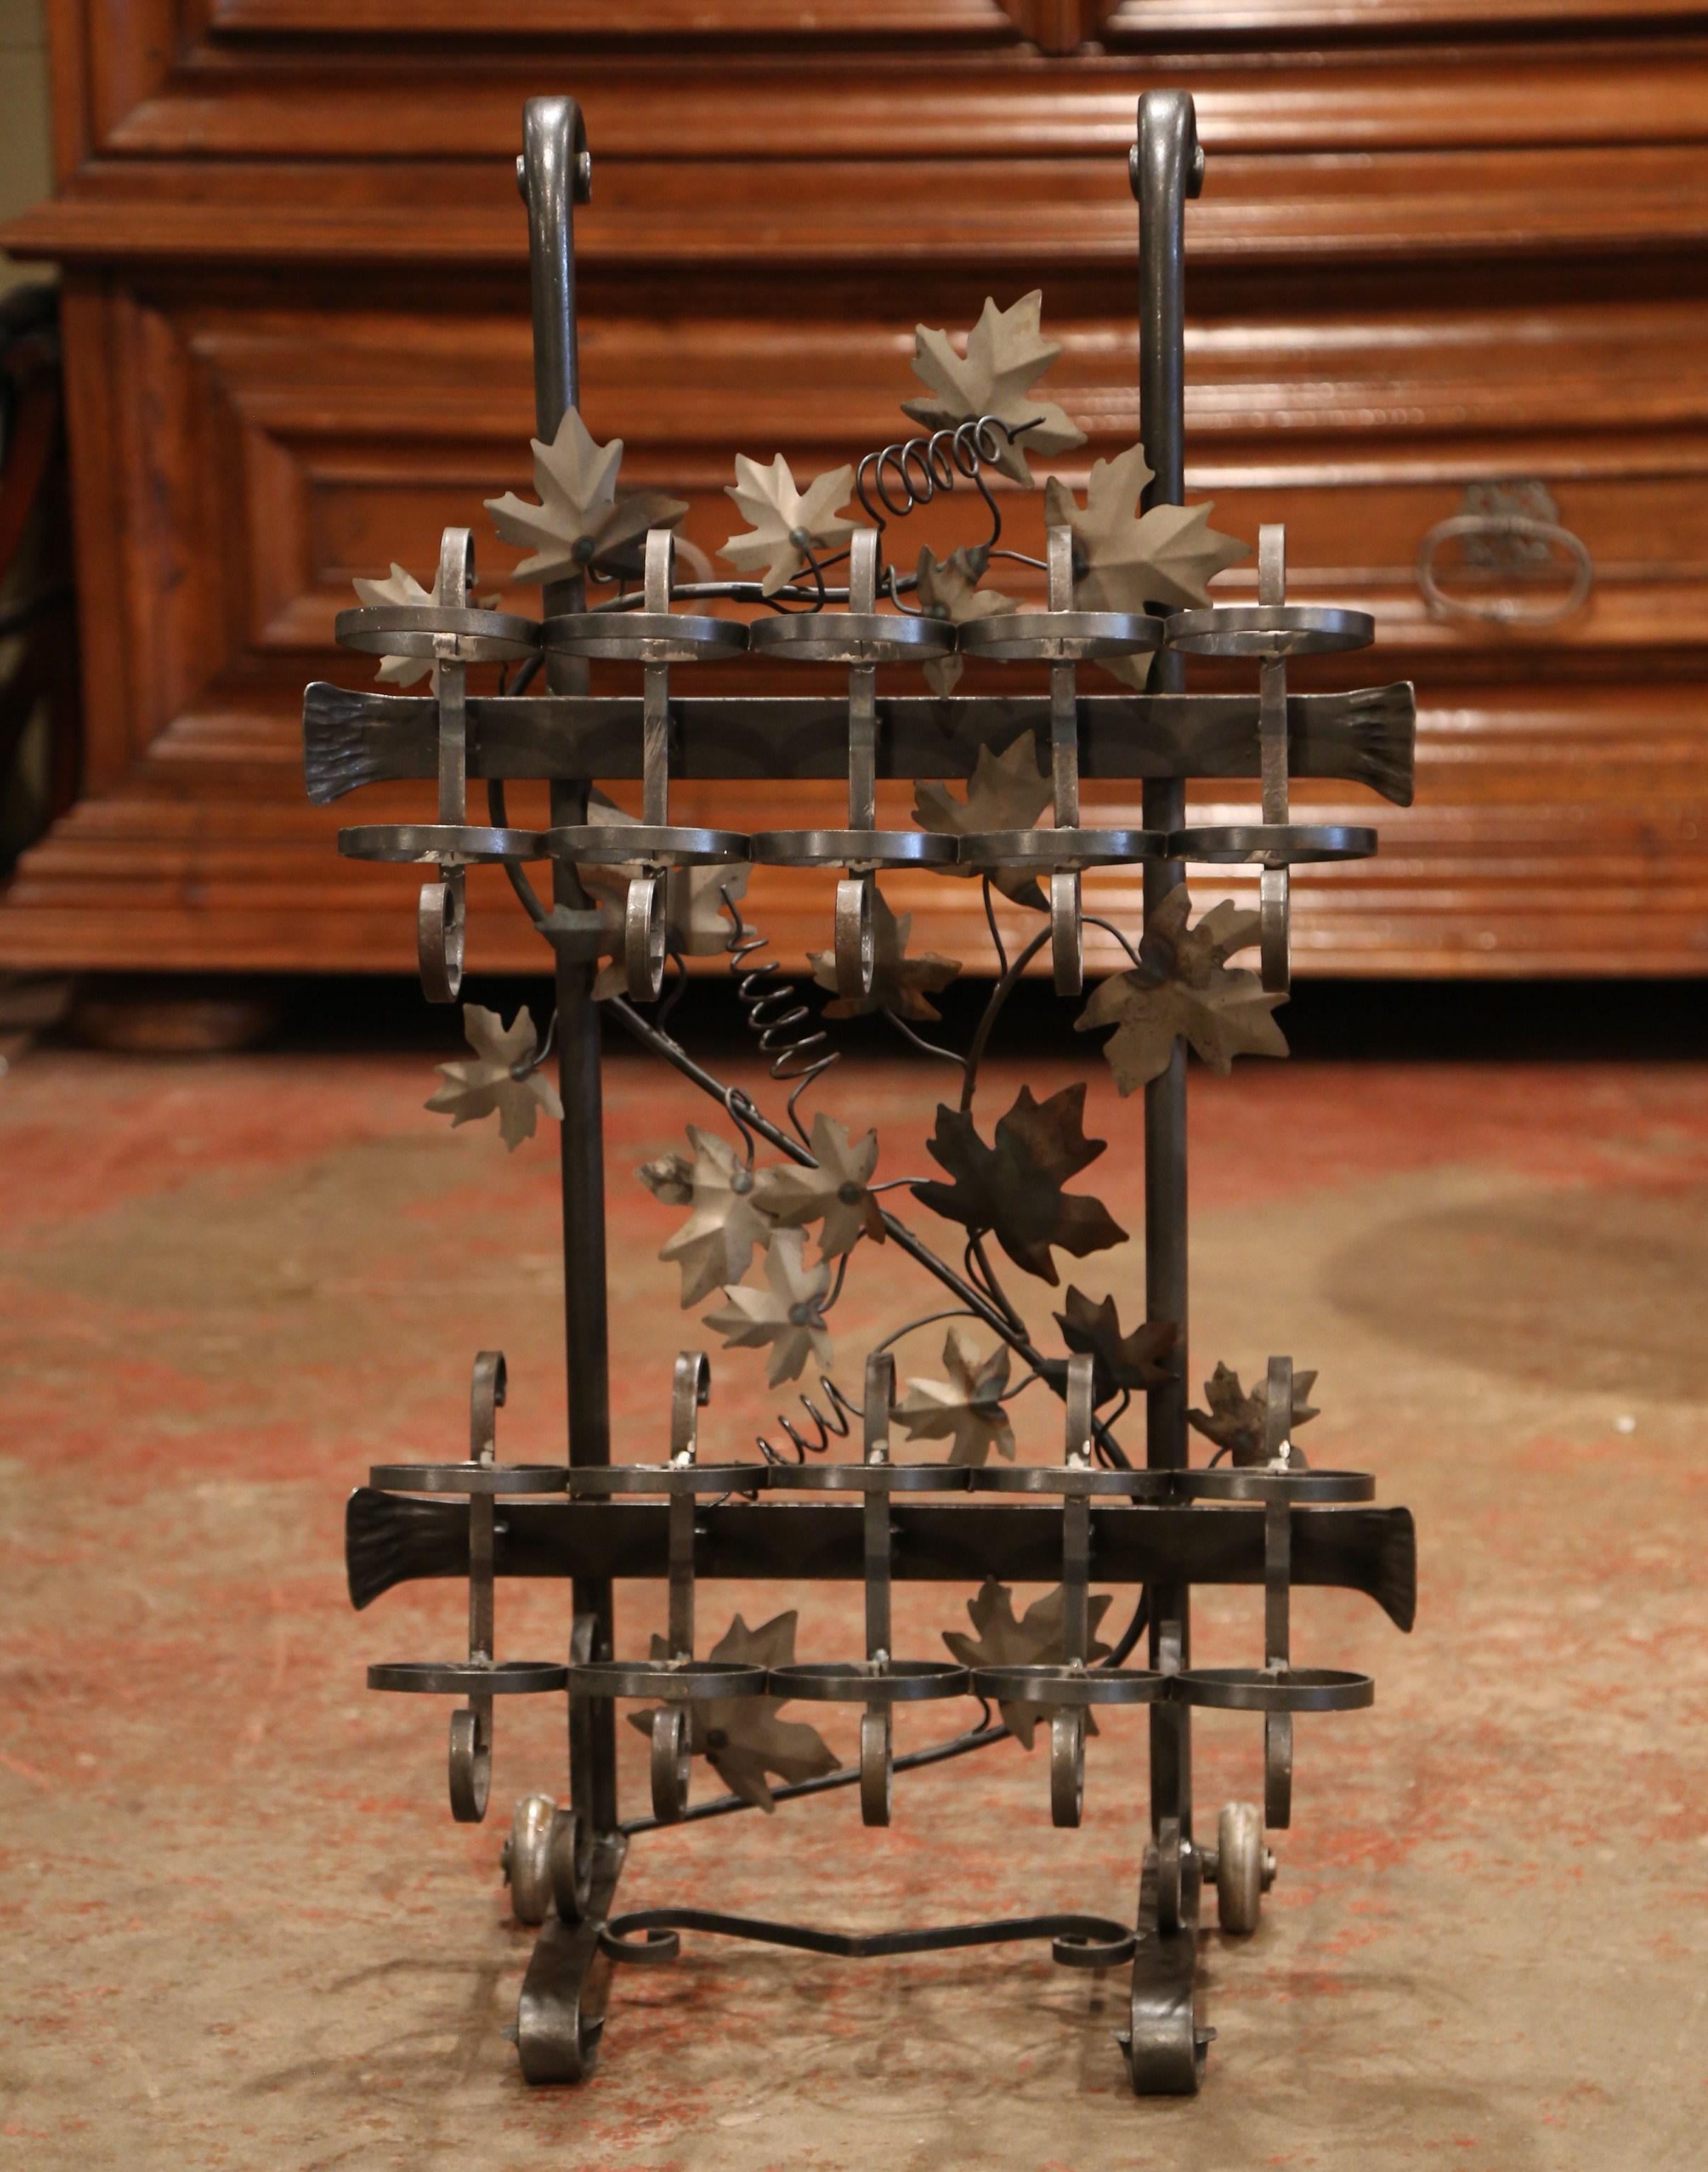 Place this French iron bottle holder in your wine cellar or wet bar to keep your space both organized and beautiful. Crafted in the Rhone region of France circa 2000, the cart is forged of iron and is decorated with metal vine leaves. The rack with